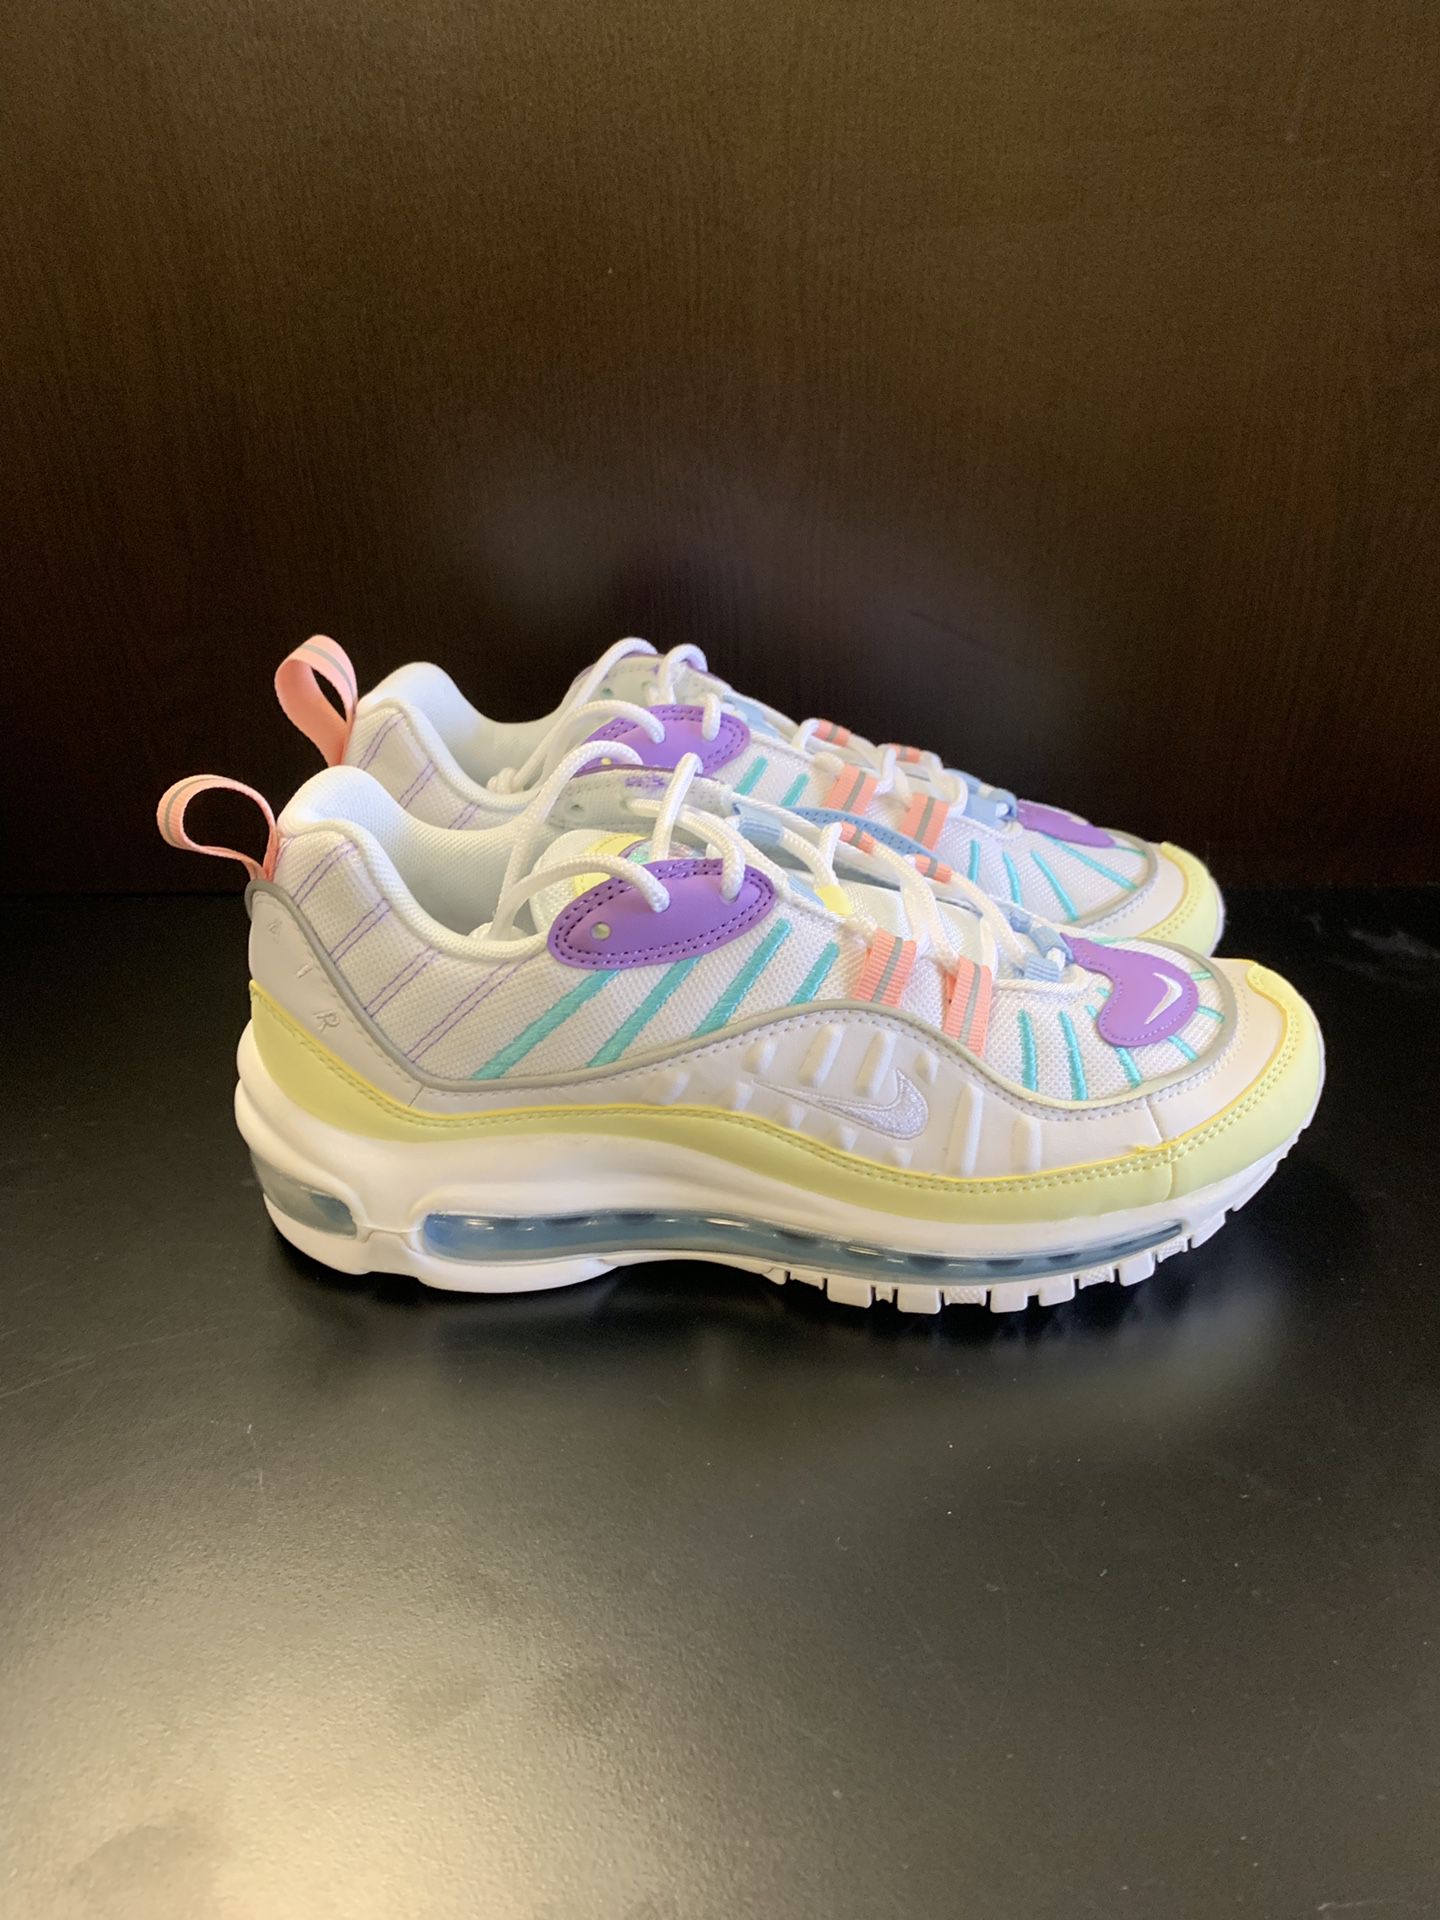 Nike Womens Air Max Easter Pastels Luminous Green Size 7.5 AH6799 300 New Free Shipping for Sale in Oceanside, CA - OfferUp